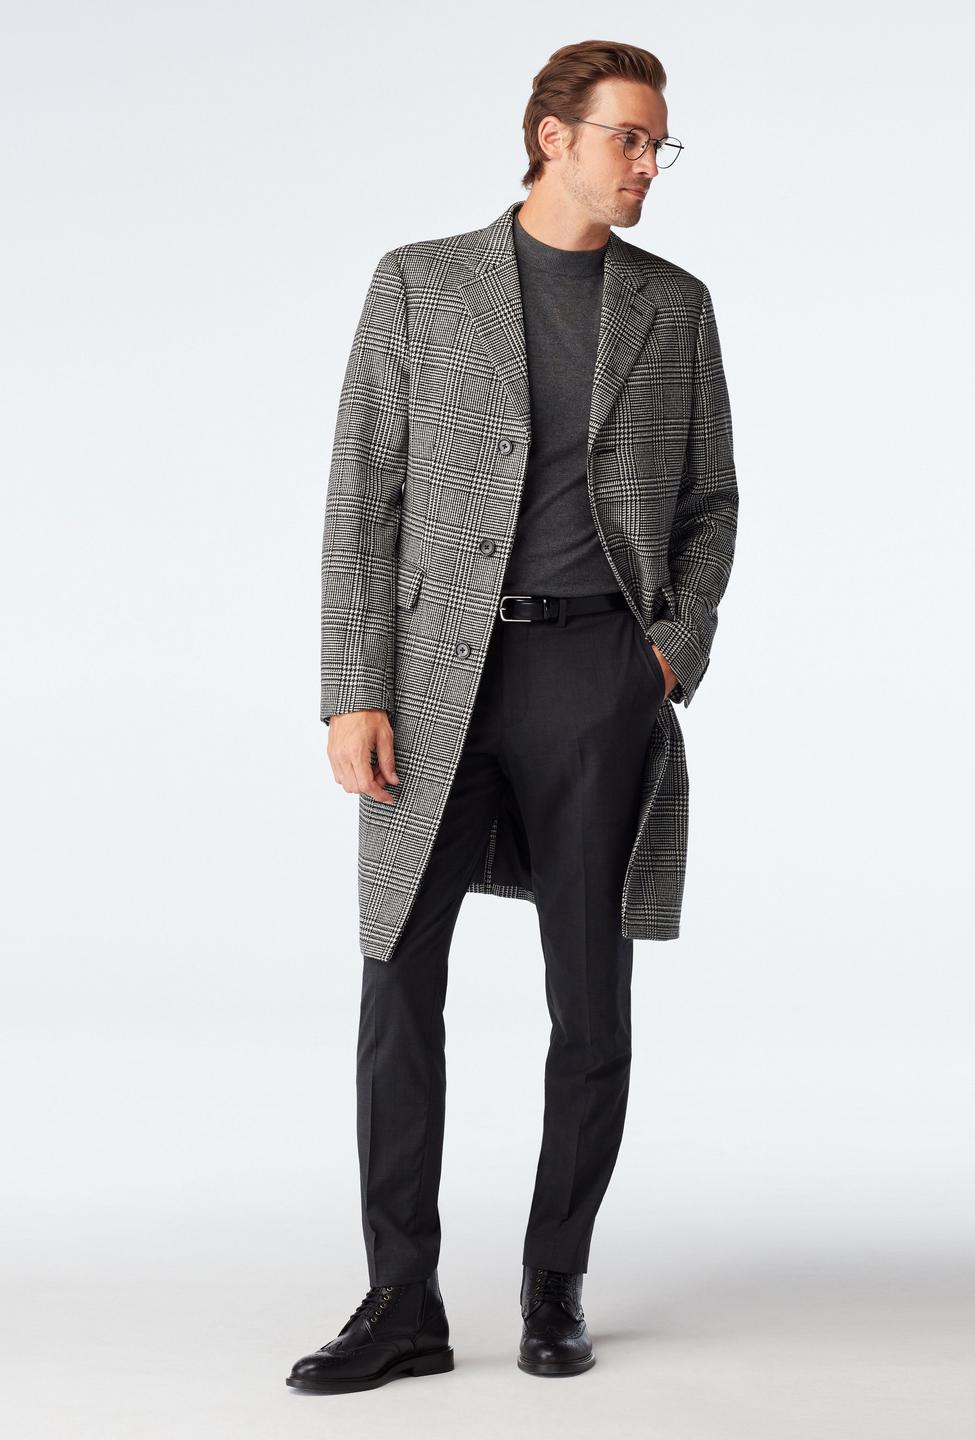 Heartford Houndstooth Black and White Quilted Overcoat